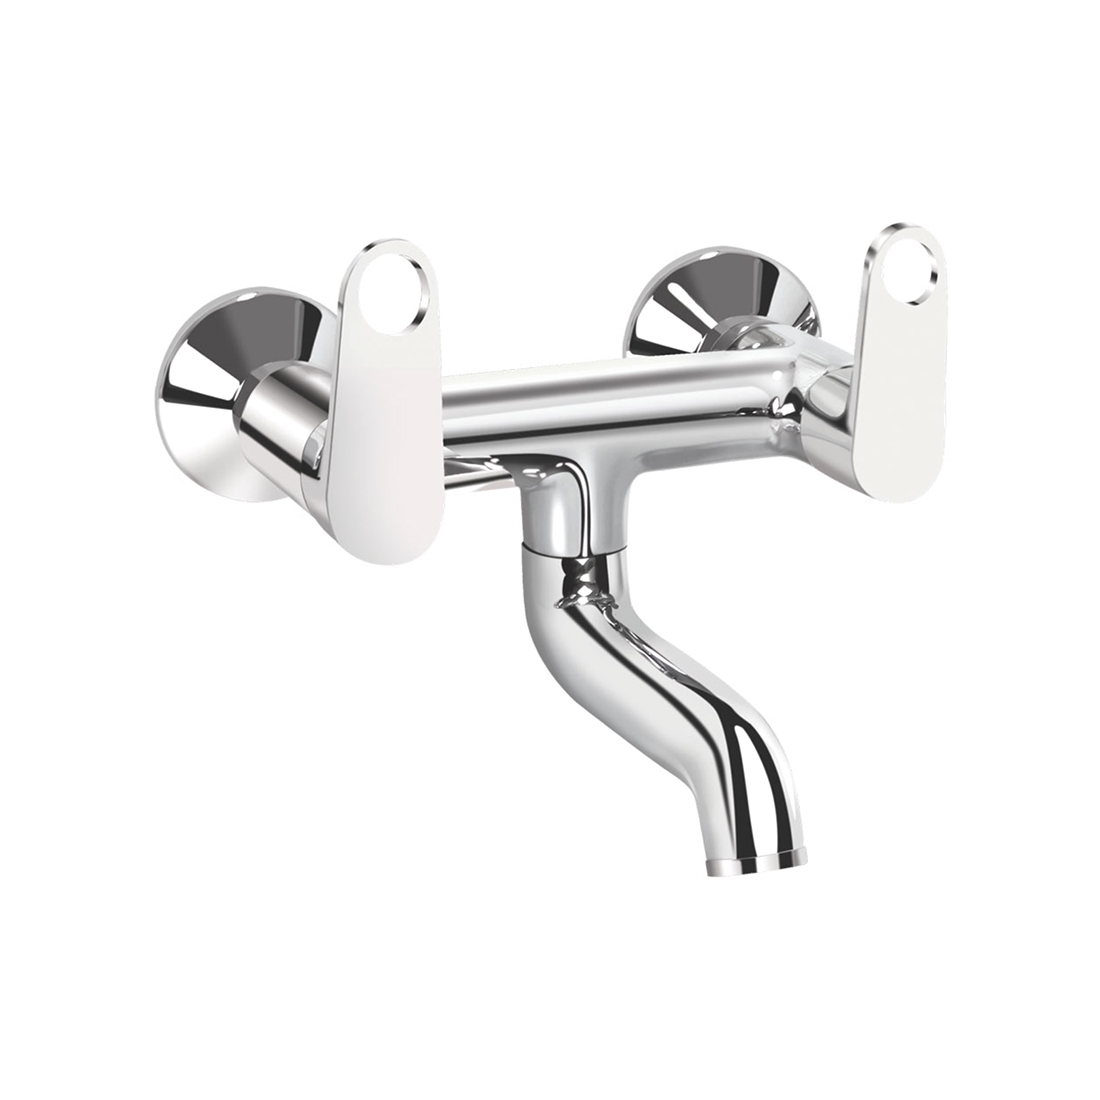 Kerovit Hydrus Plus KB511021 Non Telephonic Shower Wall Mixer With Flange